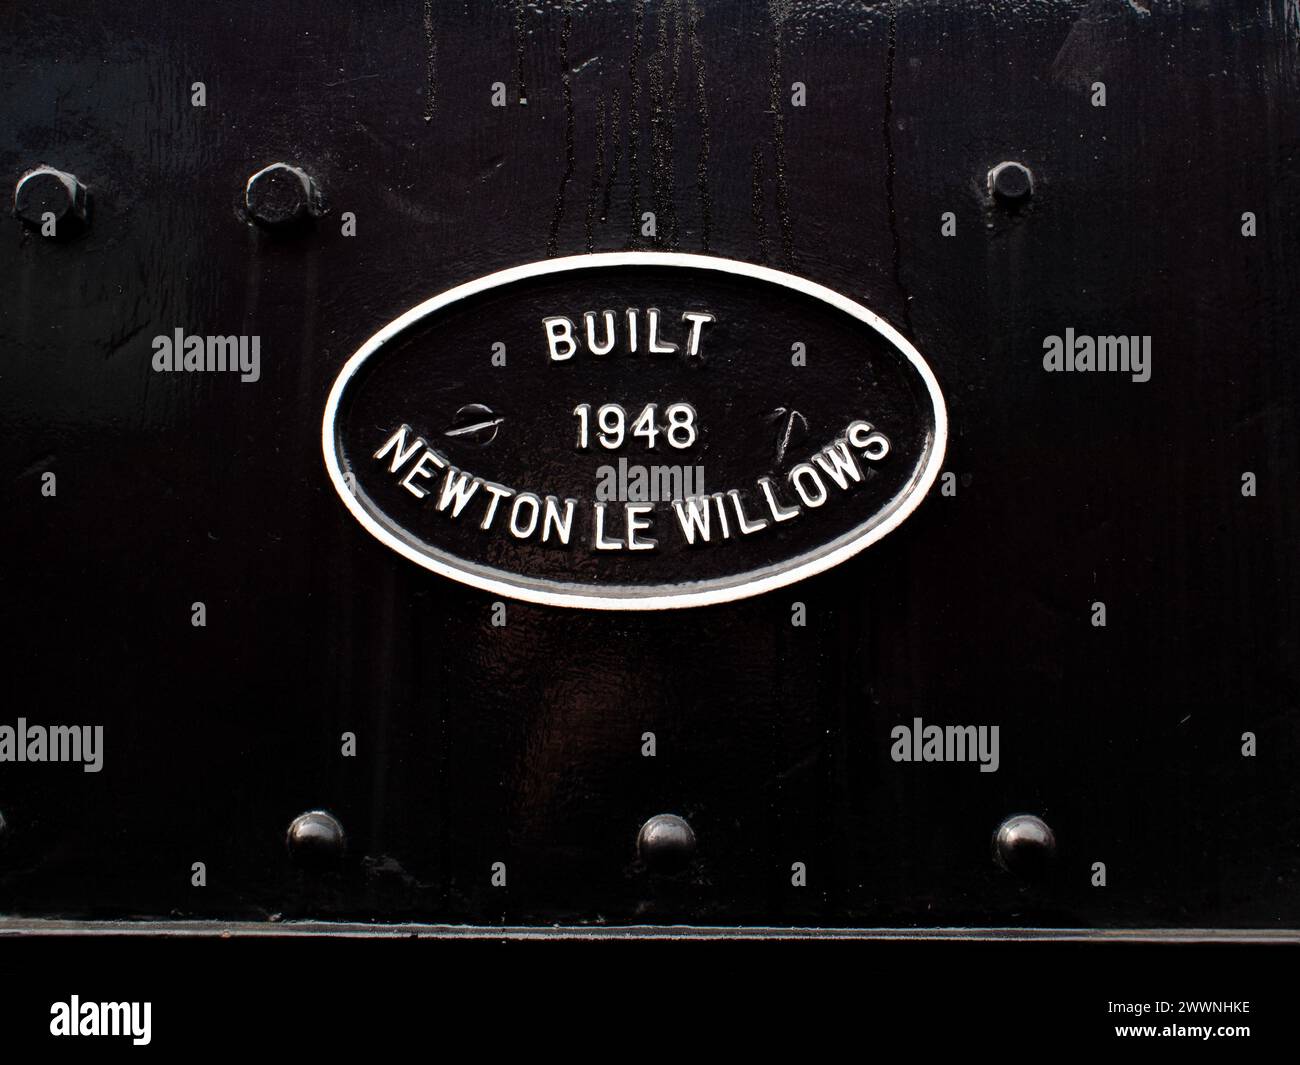 Steam engine manufacturers plate, Newton Le Willows, North Yorkshire Moors, Railway, Yorkshire, England United Kingdom Stock Photo